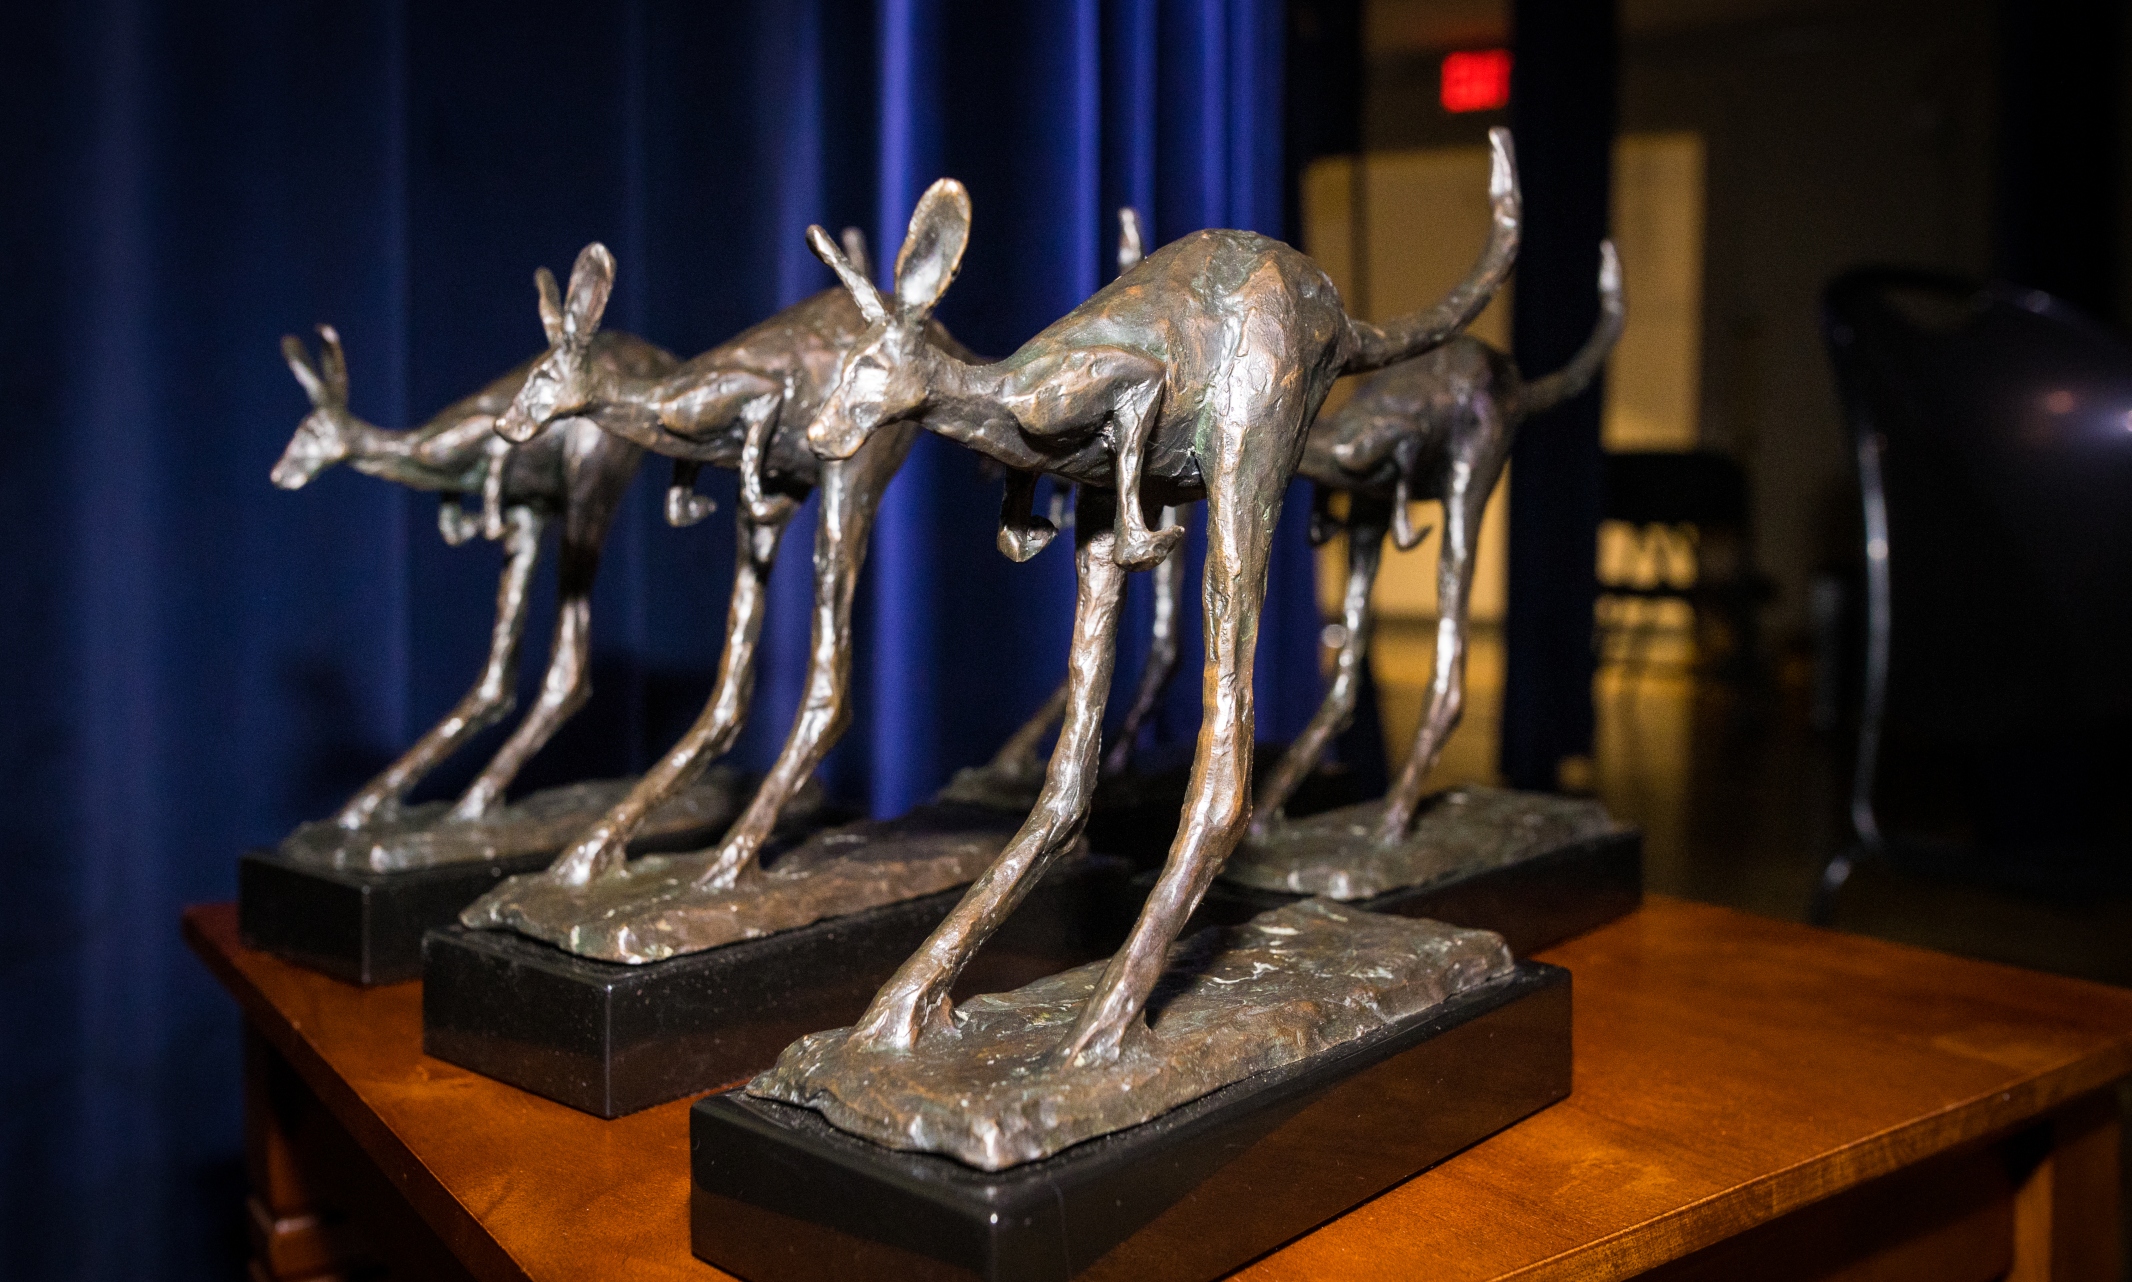 A row of roo statue trophies sit on a table